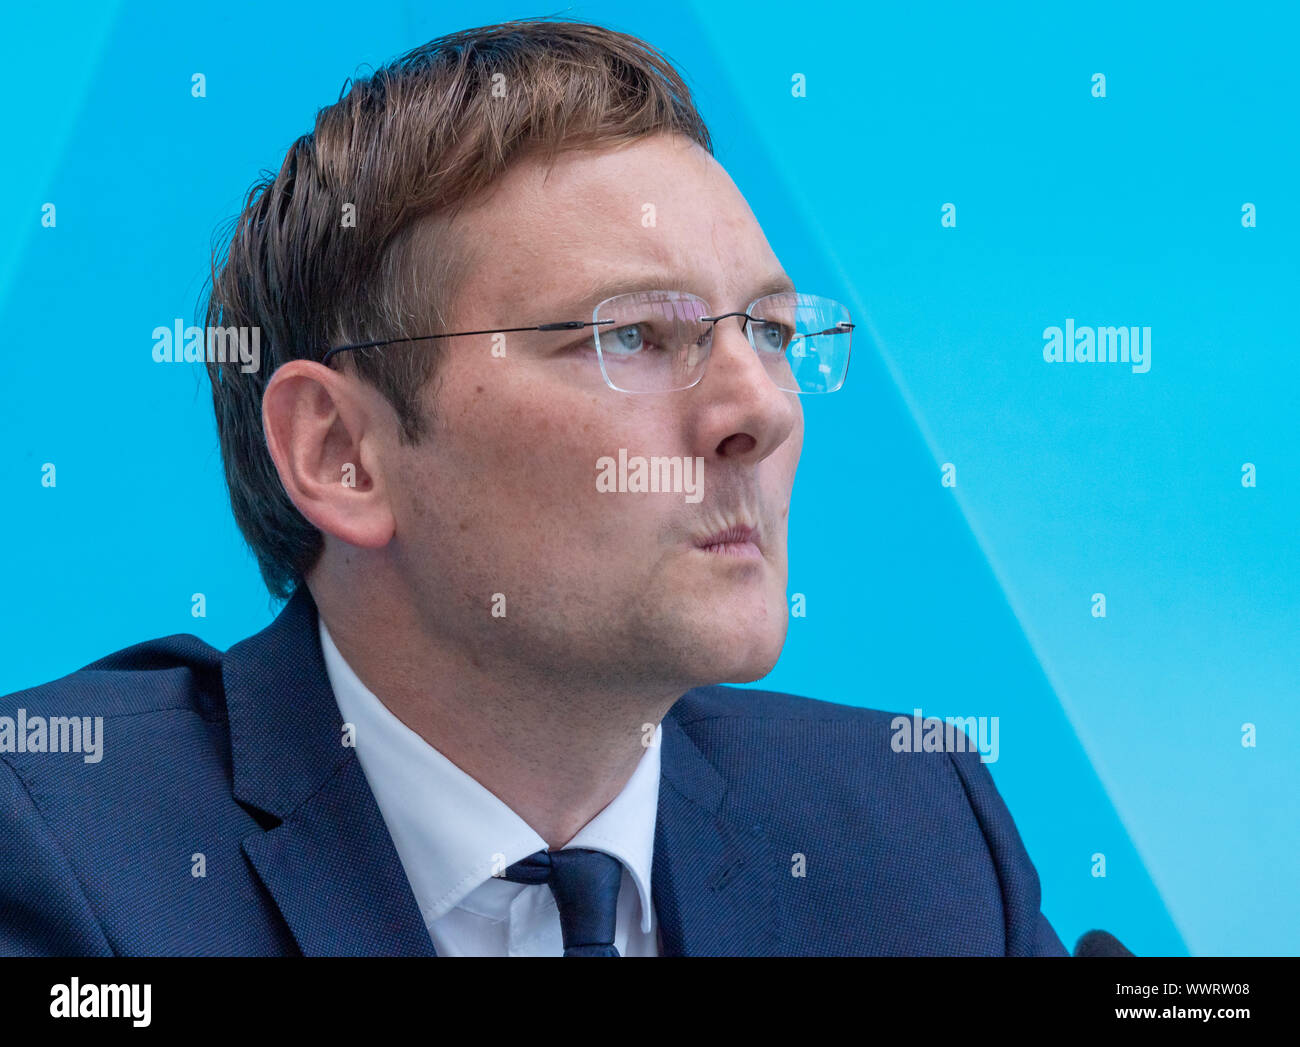 Munich, Germany. 11th Sep, 2019. Hans Reichhart (CSU), Minister of State for Housing, Construction and Transport, takes part in a press conference at the State Chancellery after the top meeting on housing policy. Prime Minister Söder may have to reshuffle his cabinet in the spring, as Reichhart intends to become district administrator of Günzburg. Credit: Peter Kneffel/dpa/Alamy Live News Stock Photo